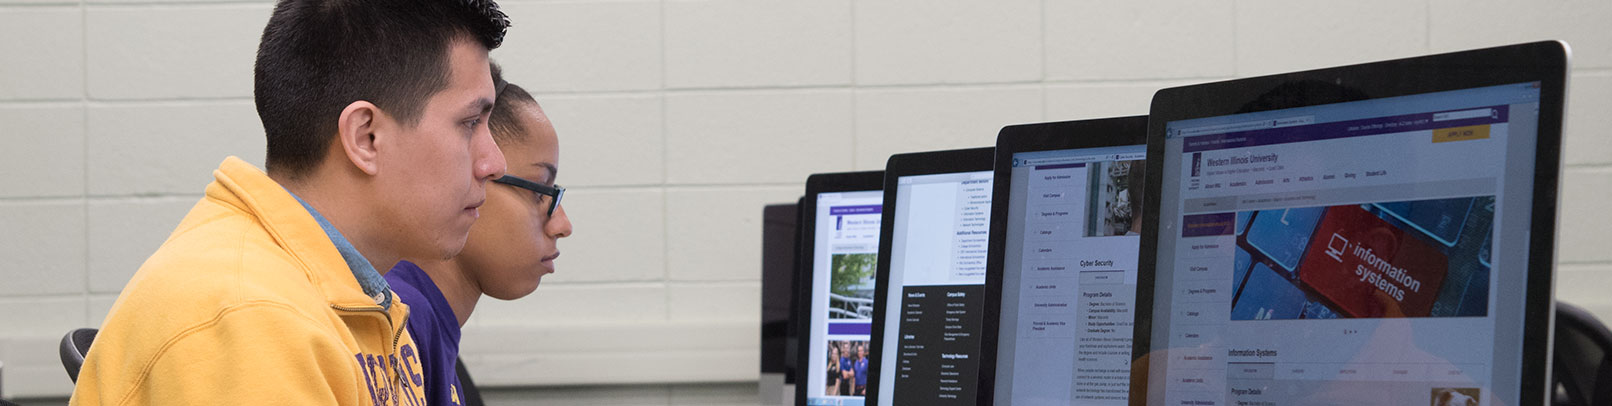 Bachelor of Science in Information Systems - Western Illinois University